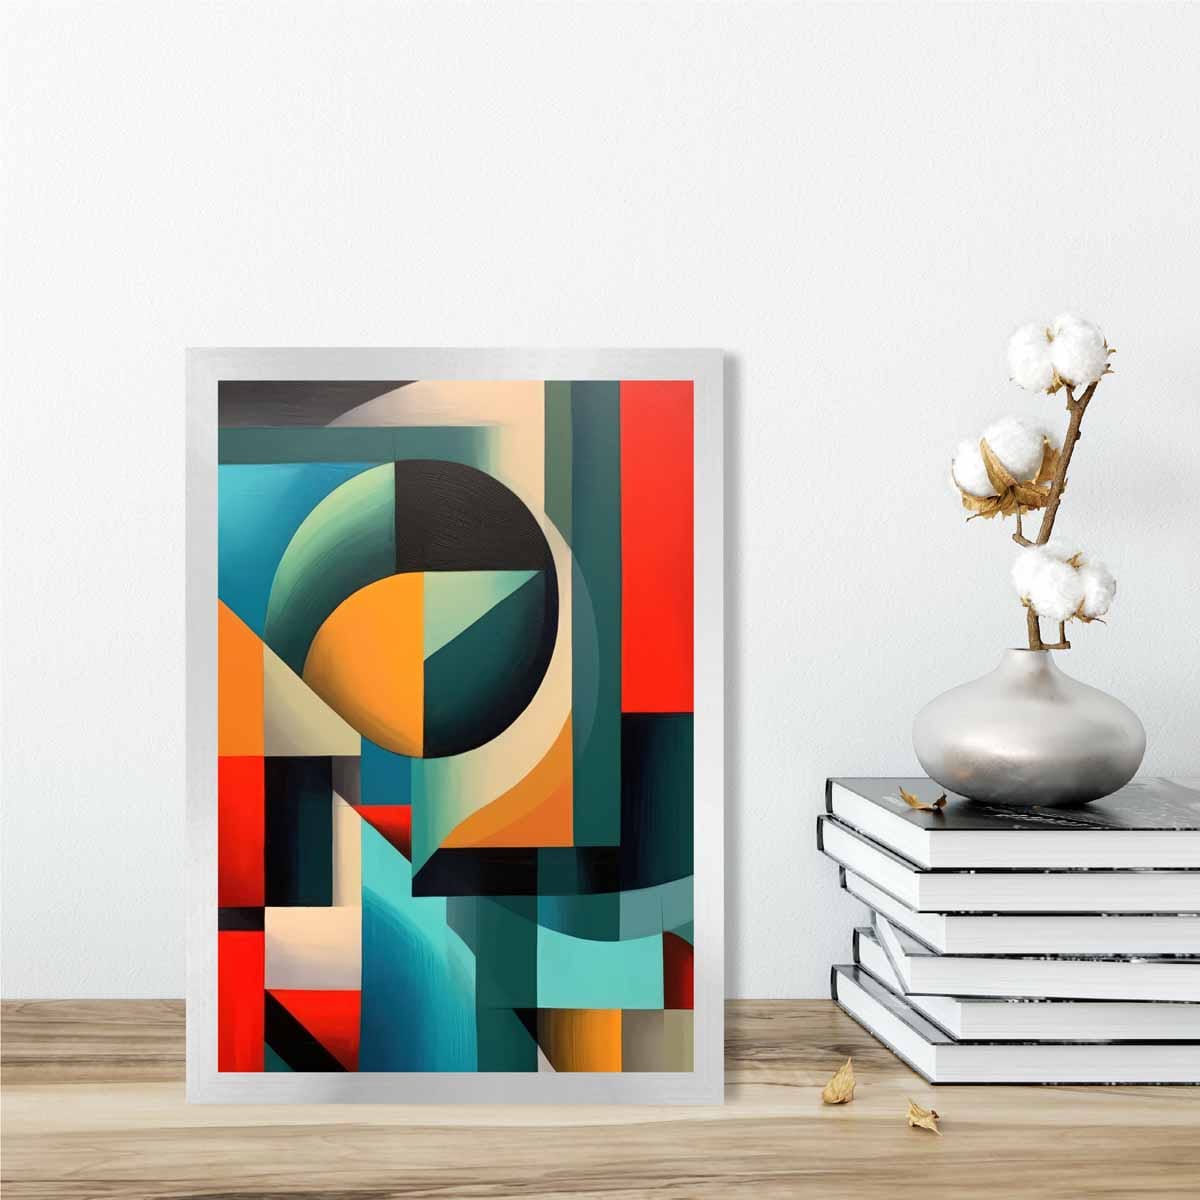 Abstract Colourful Shapes Art Print Blue Red Orange No 1